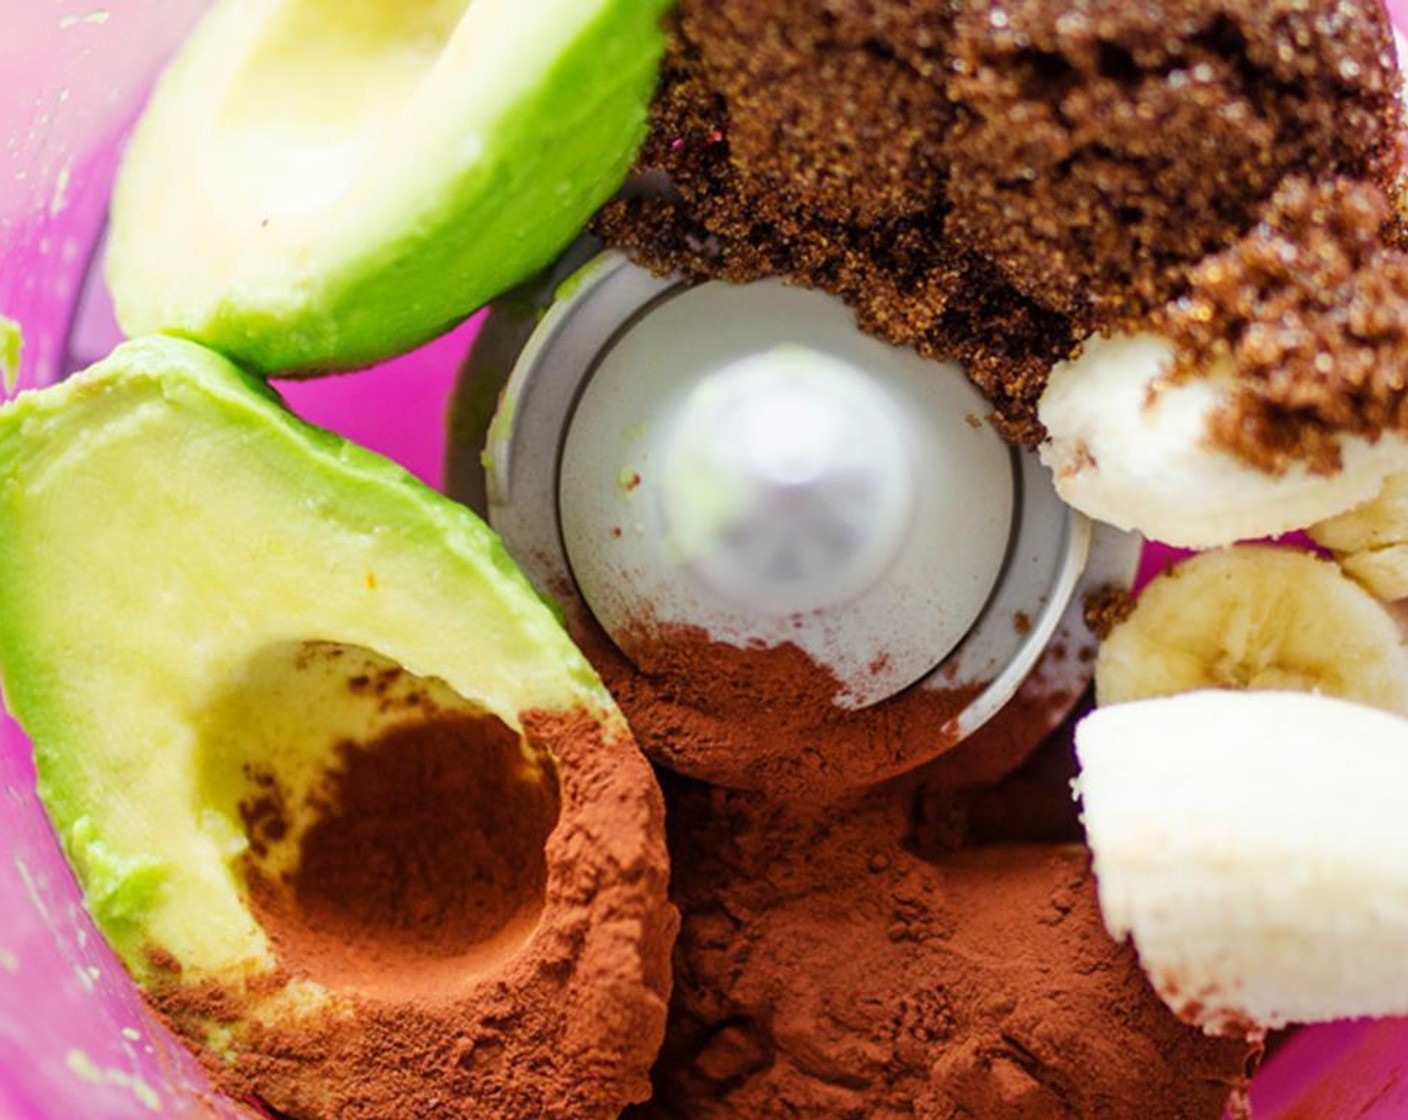 step 1 Combine Avocado (1), Banana (1), Unsweetened Cocoa Powder (2 Tbsp), Brown Sugar (2 Tbsp), and Milk (1/2 cup) in a blender.